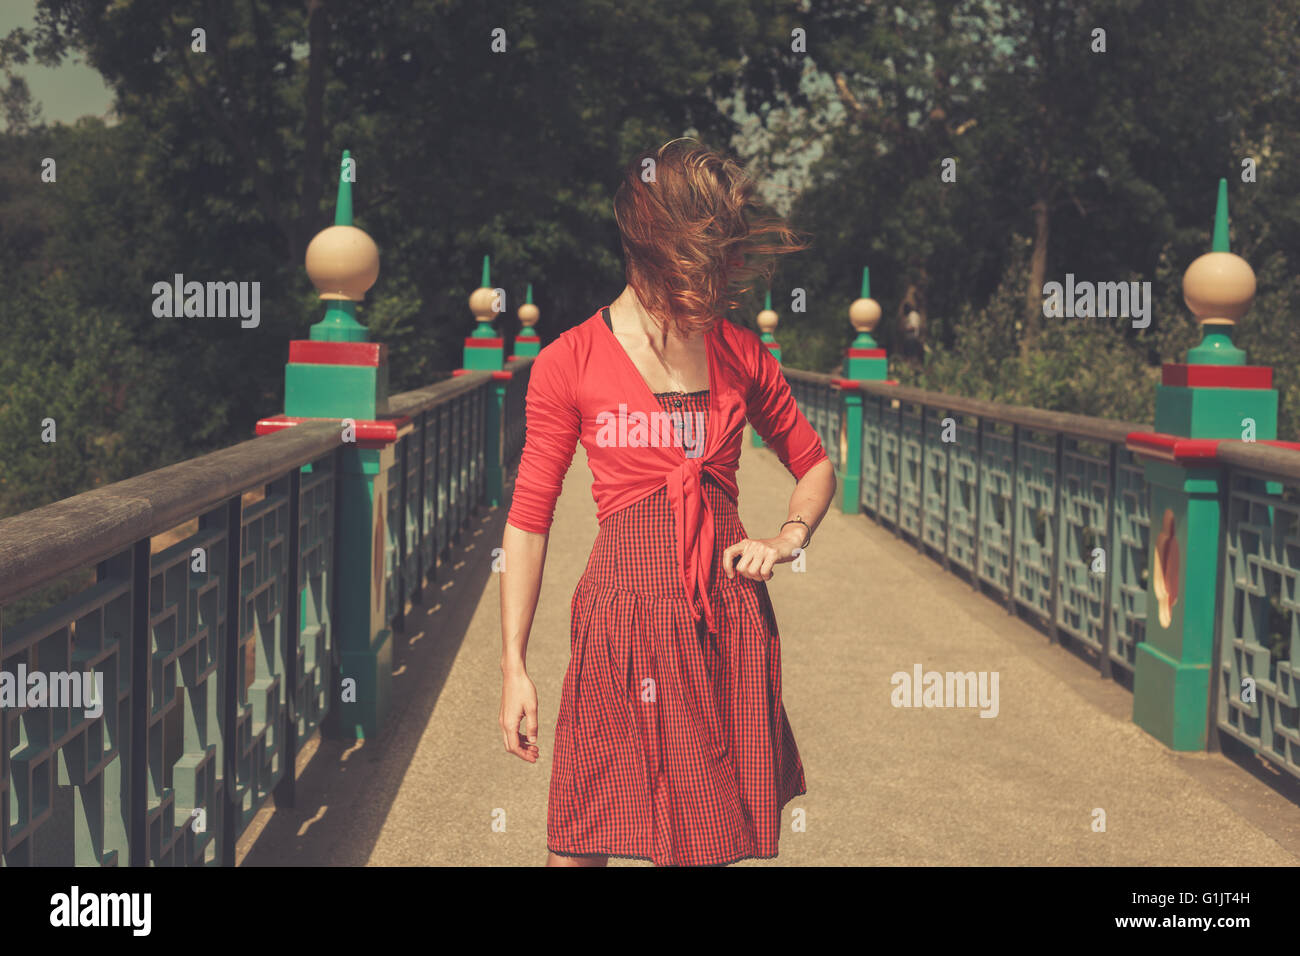 A young woman wearing a red dress is standing on a bridge in a park Stock Photo